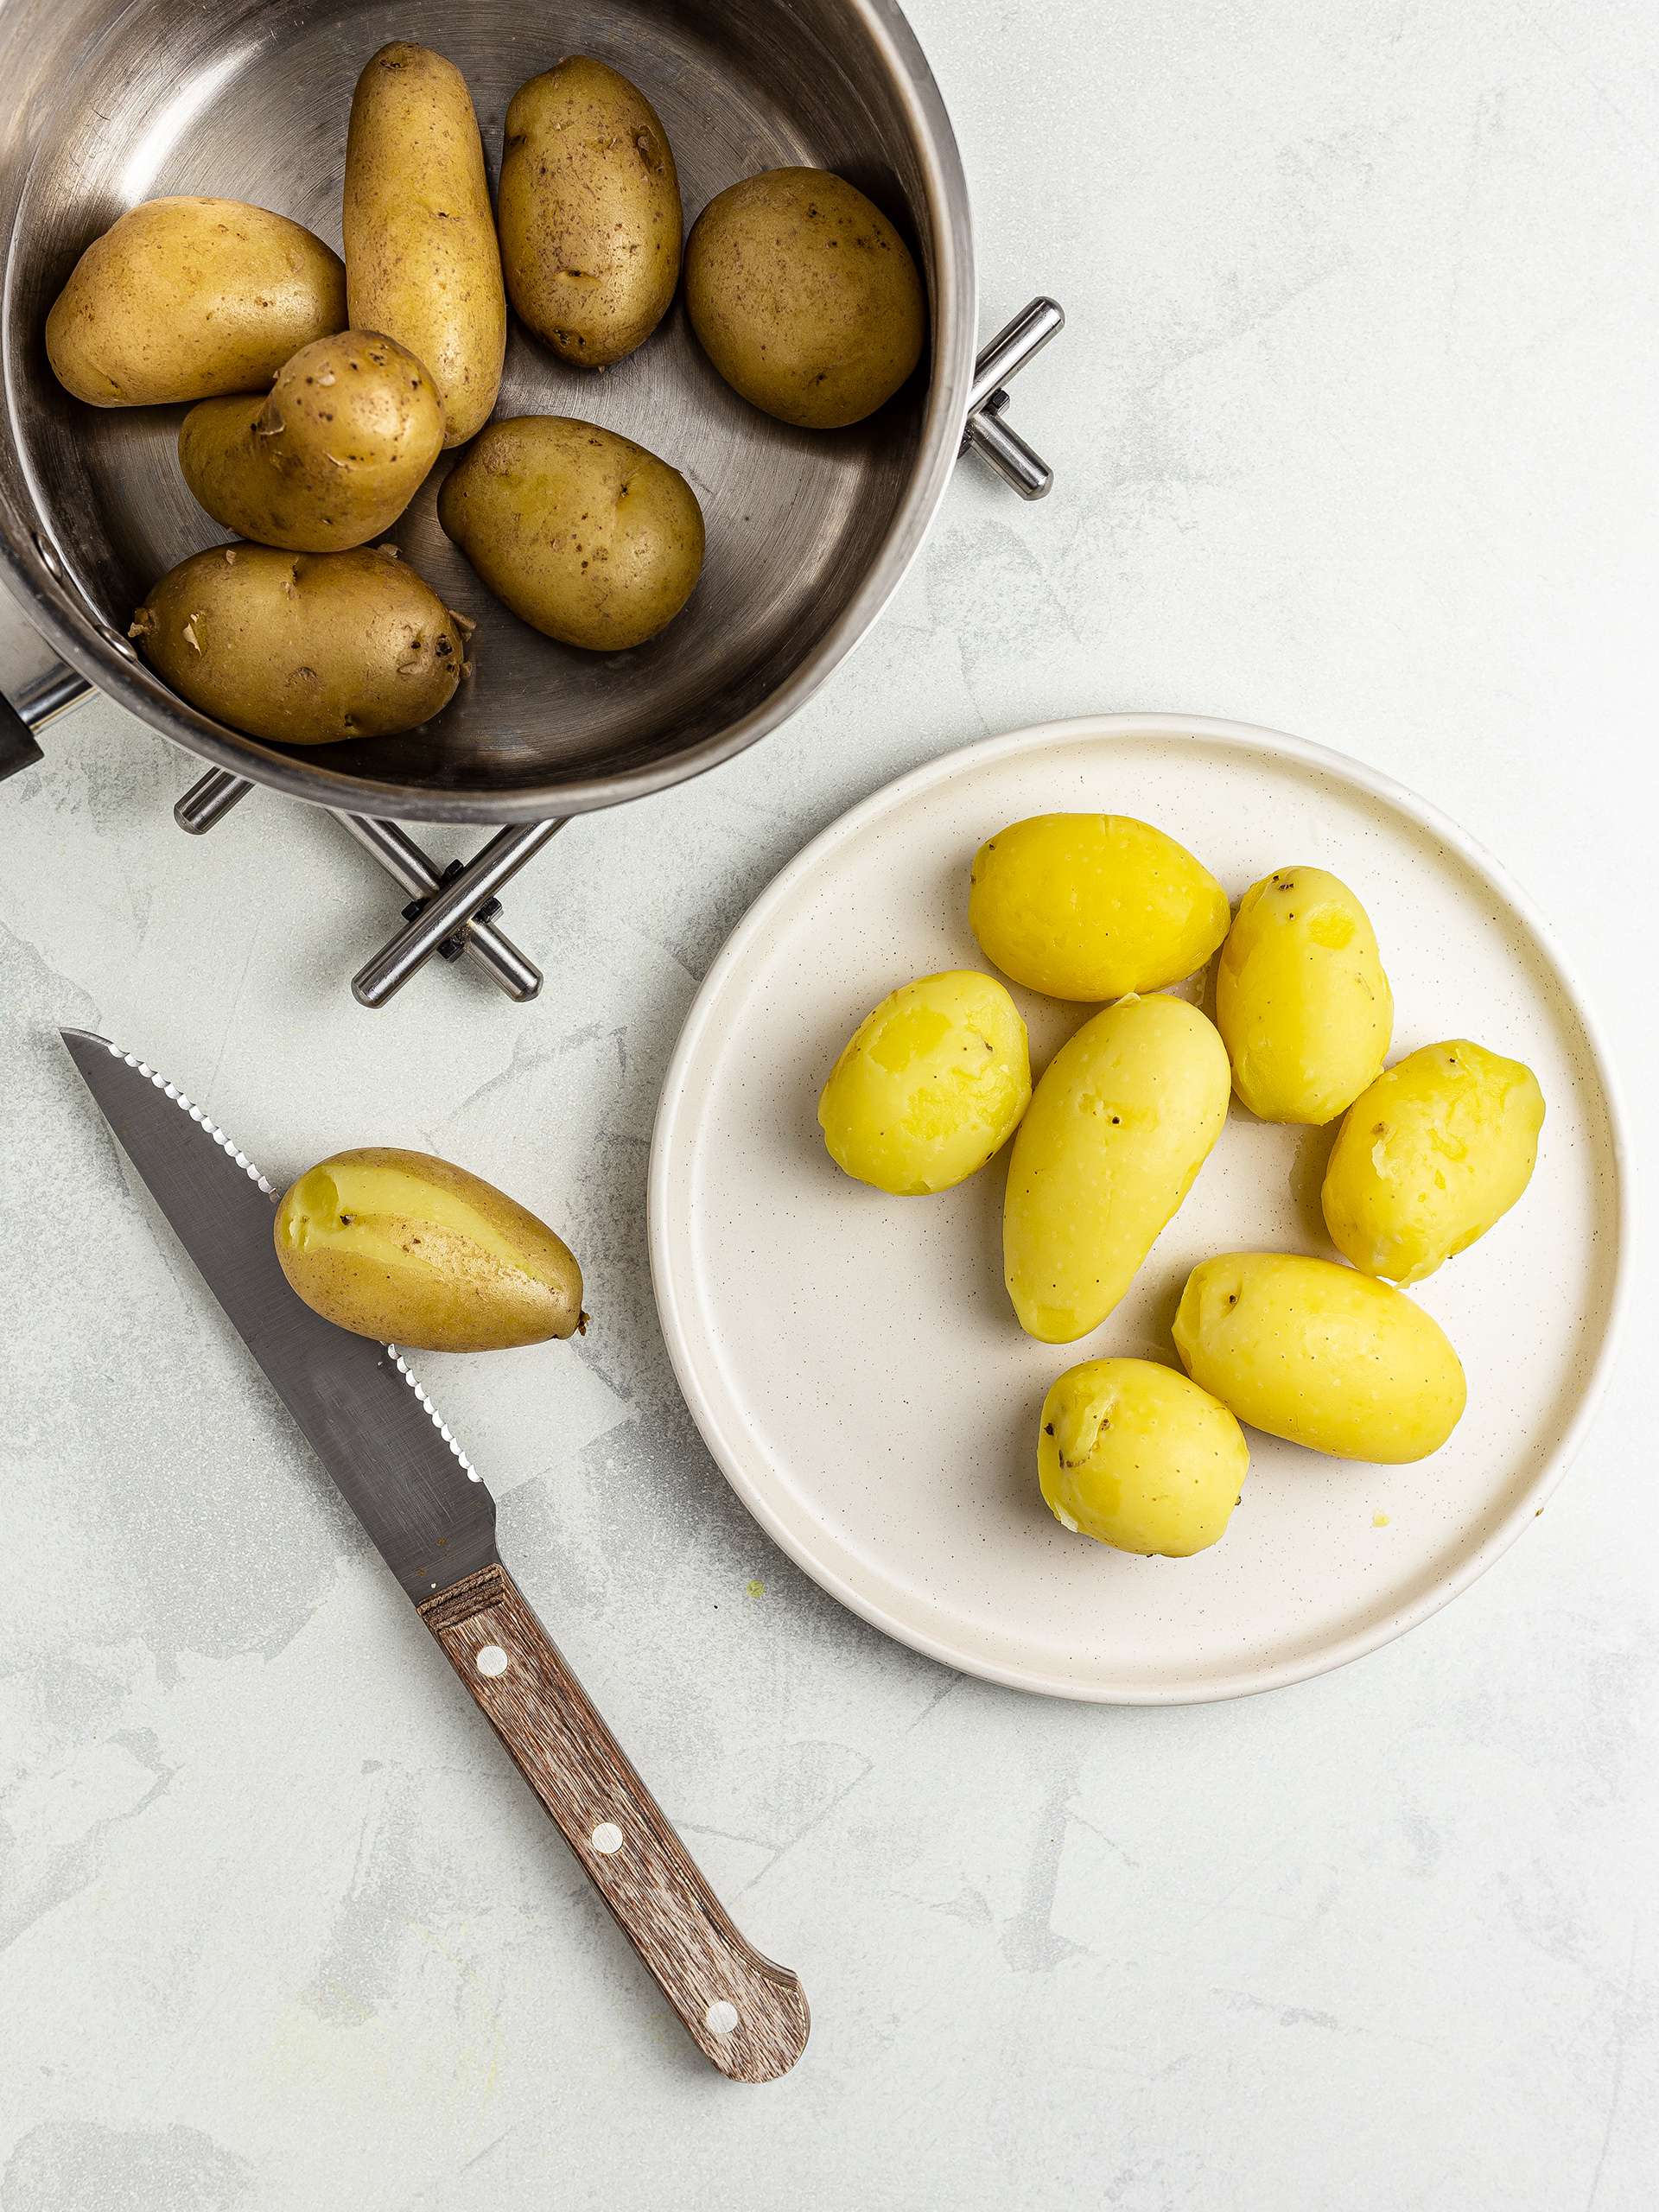 boiled and peeled baby potatoes